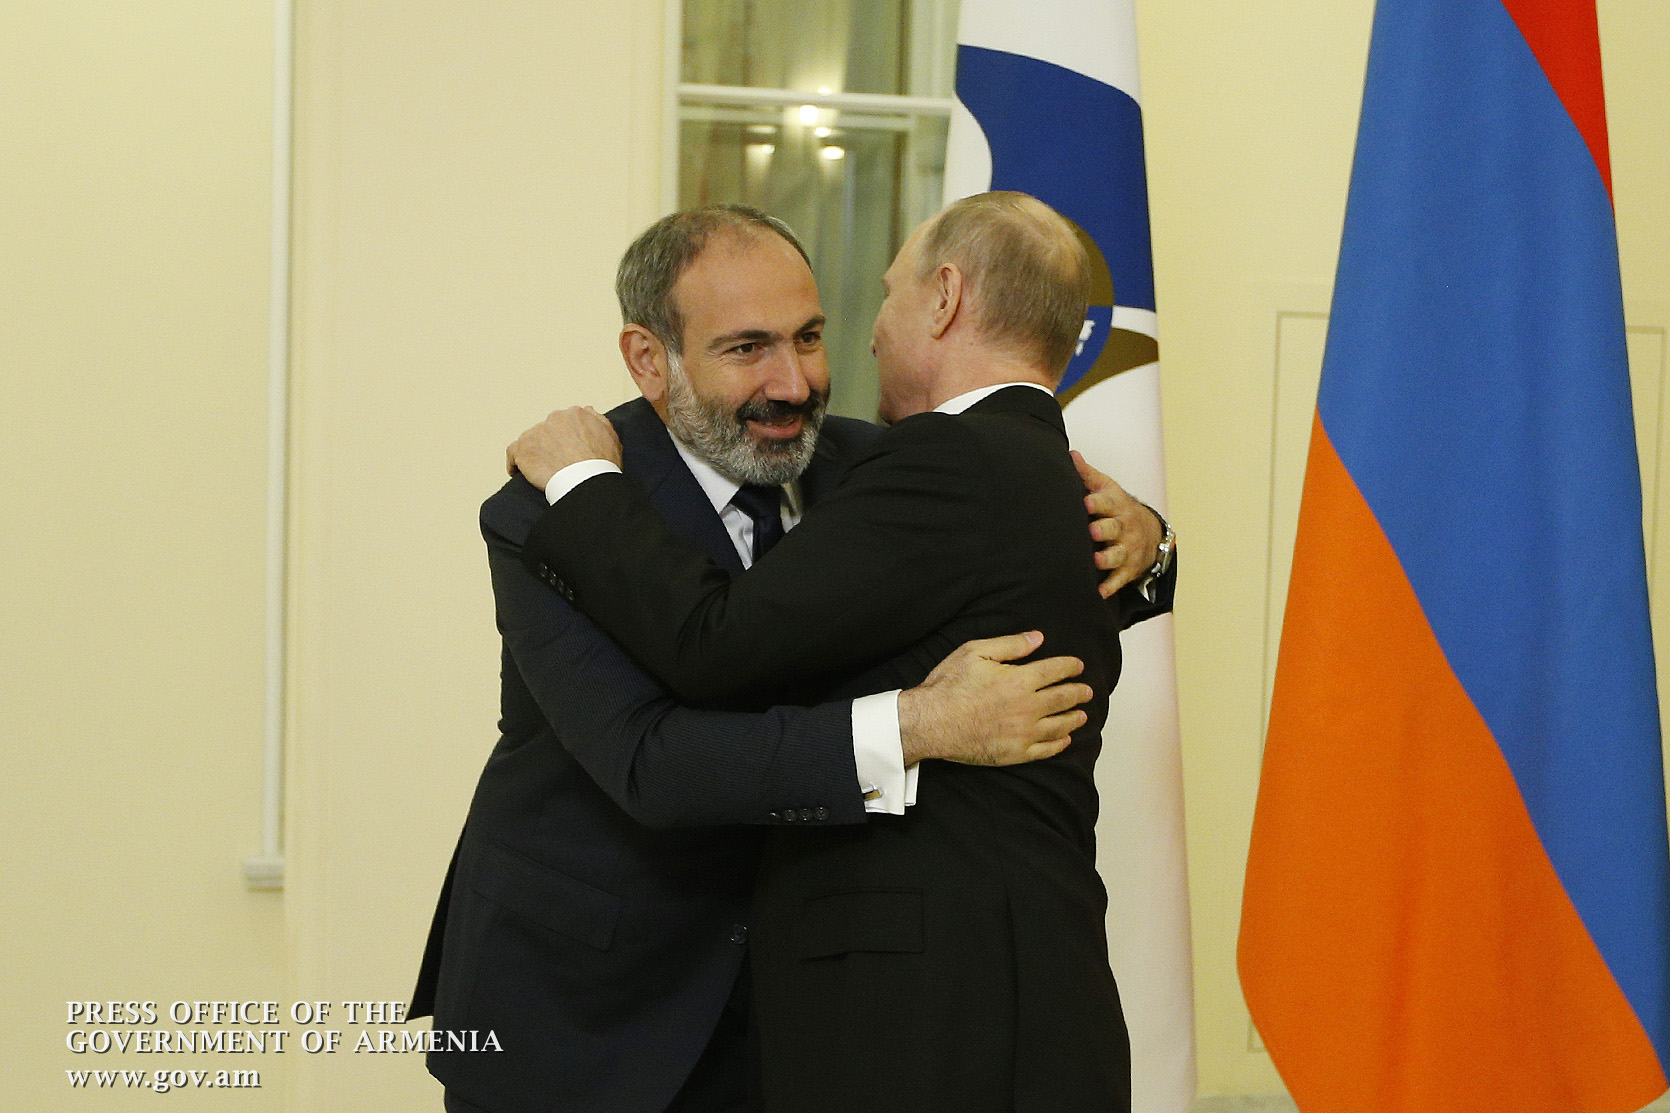 Pashinyan sends congratulatory message to Vladimir Putin on the occasion of the 30th anniversary of diplomatic relations between Armenia and Russia